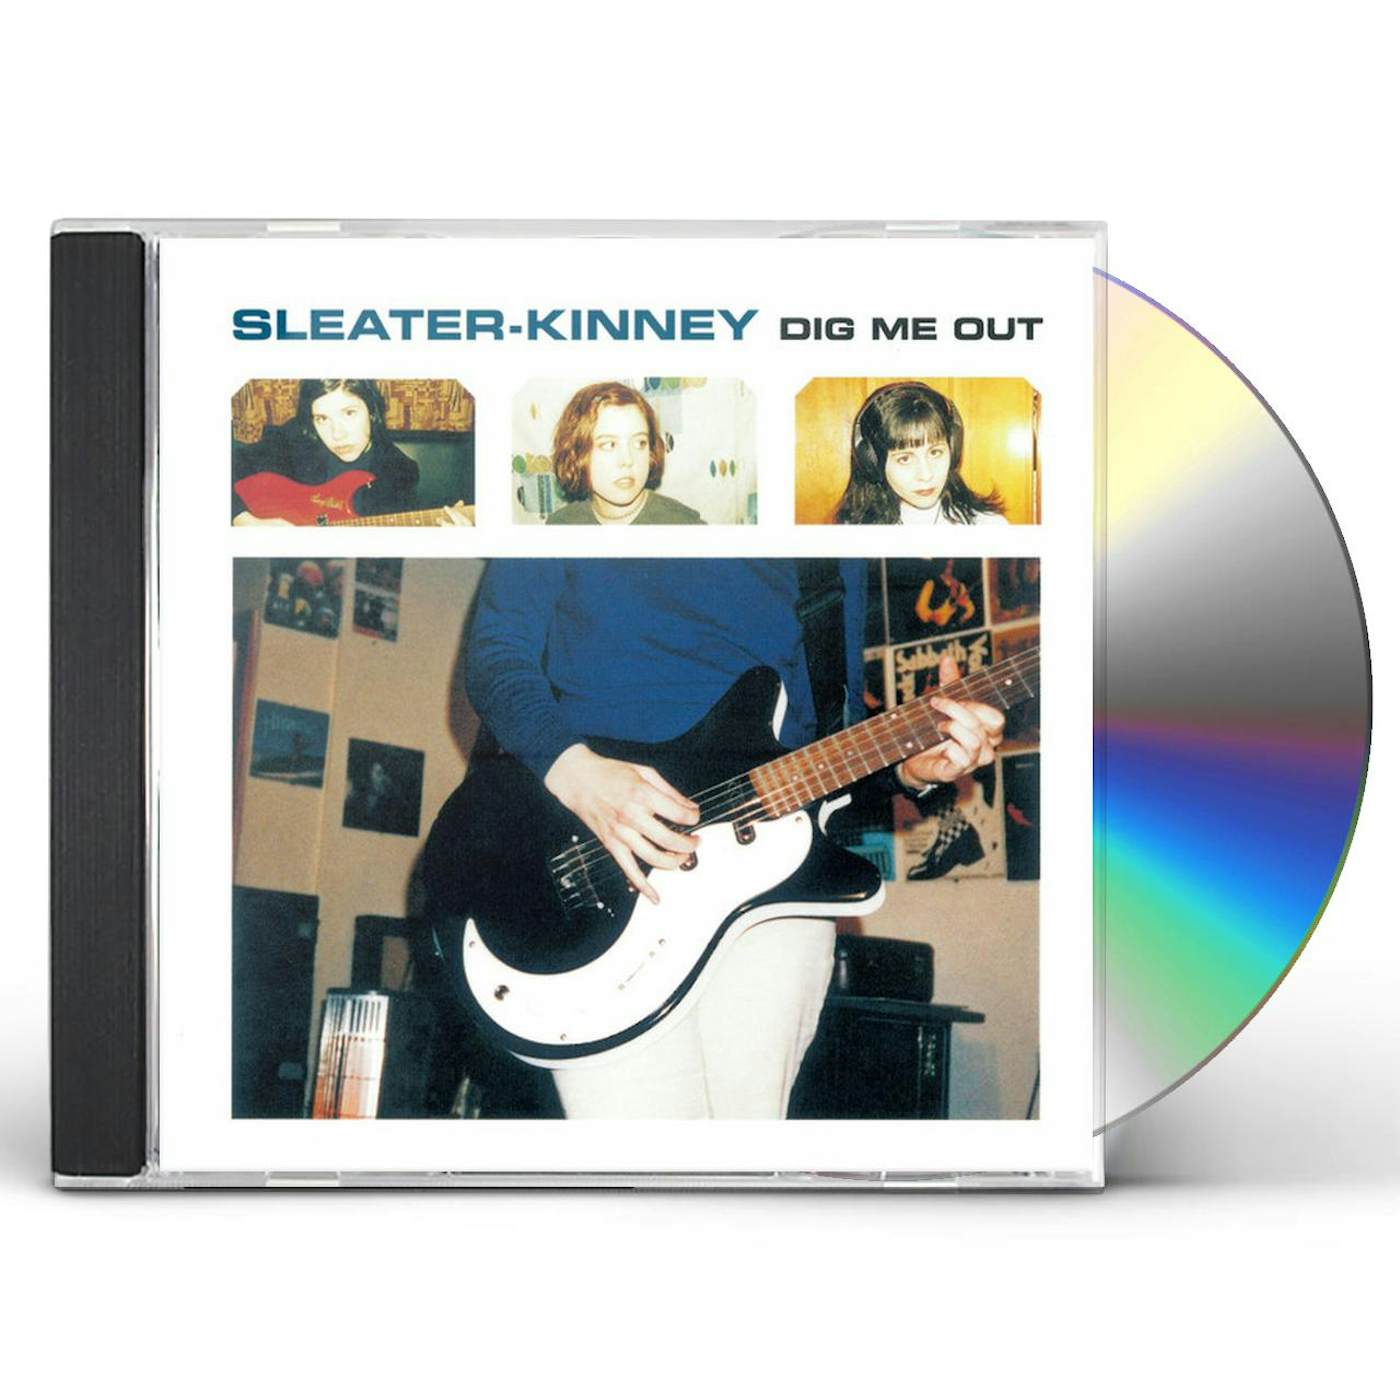 Sleater-Kinney DIG ME OUT CD